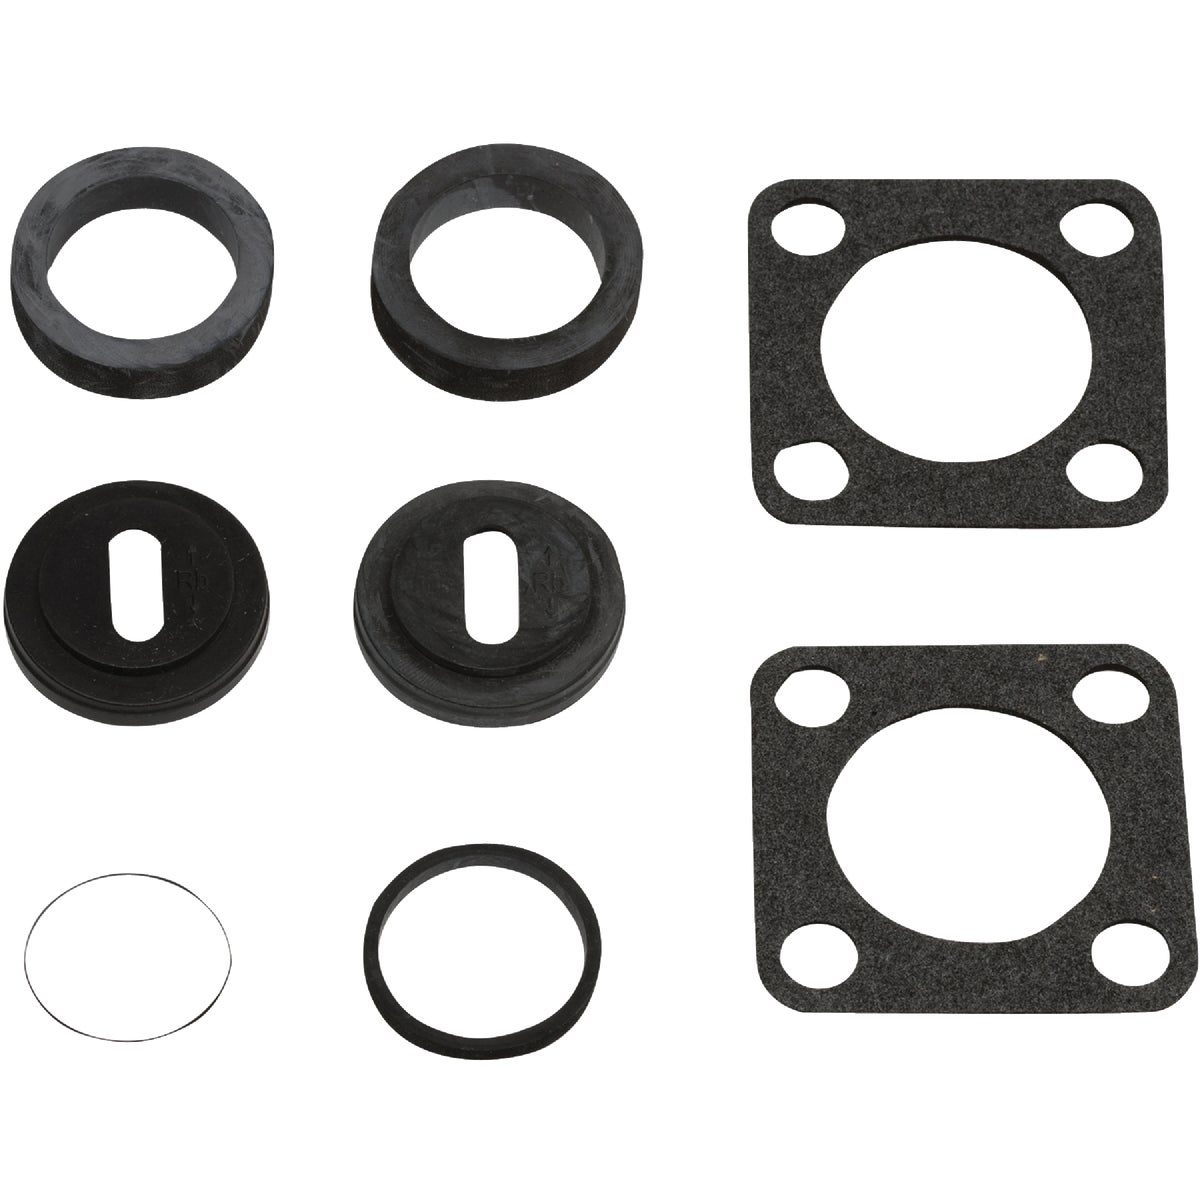 Item 440632, Contains 2 each of the following gaskets: LS style, TG Square style, UF 